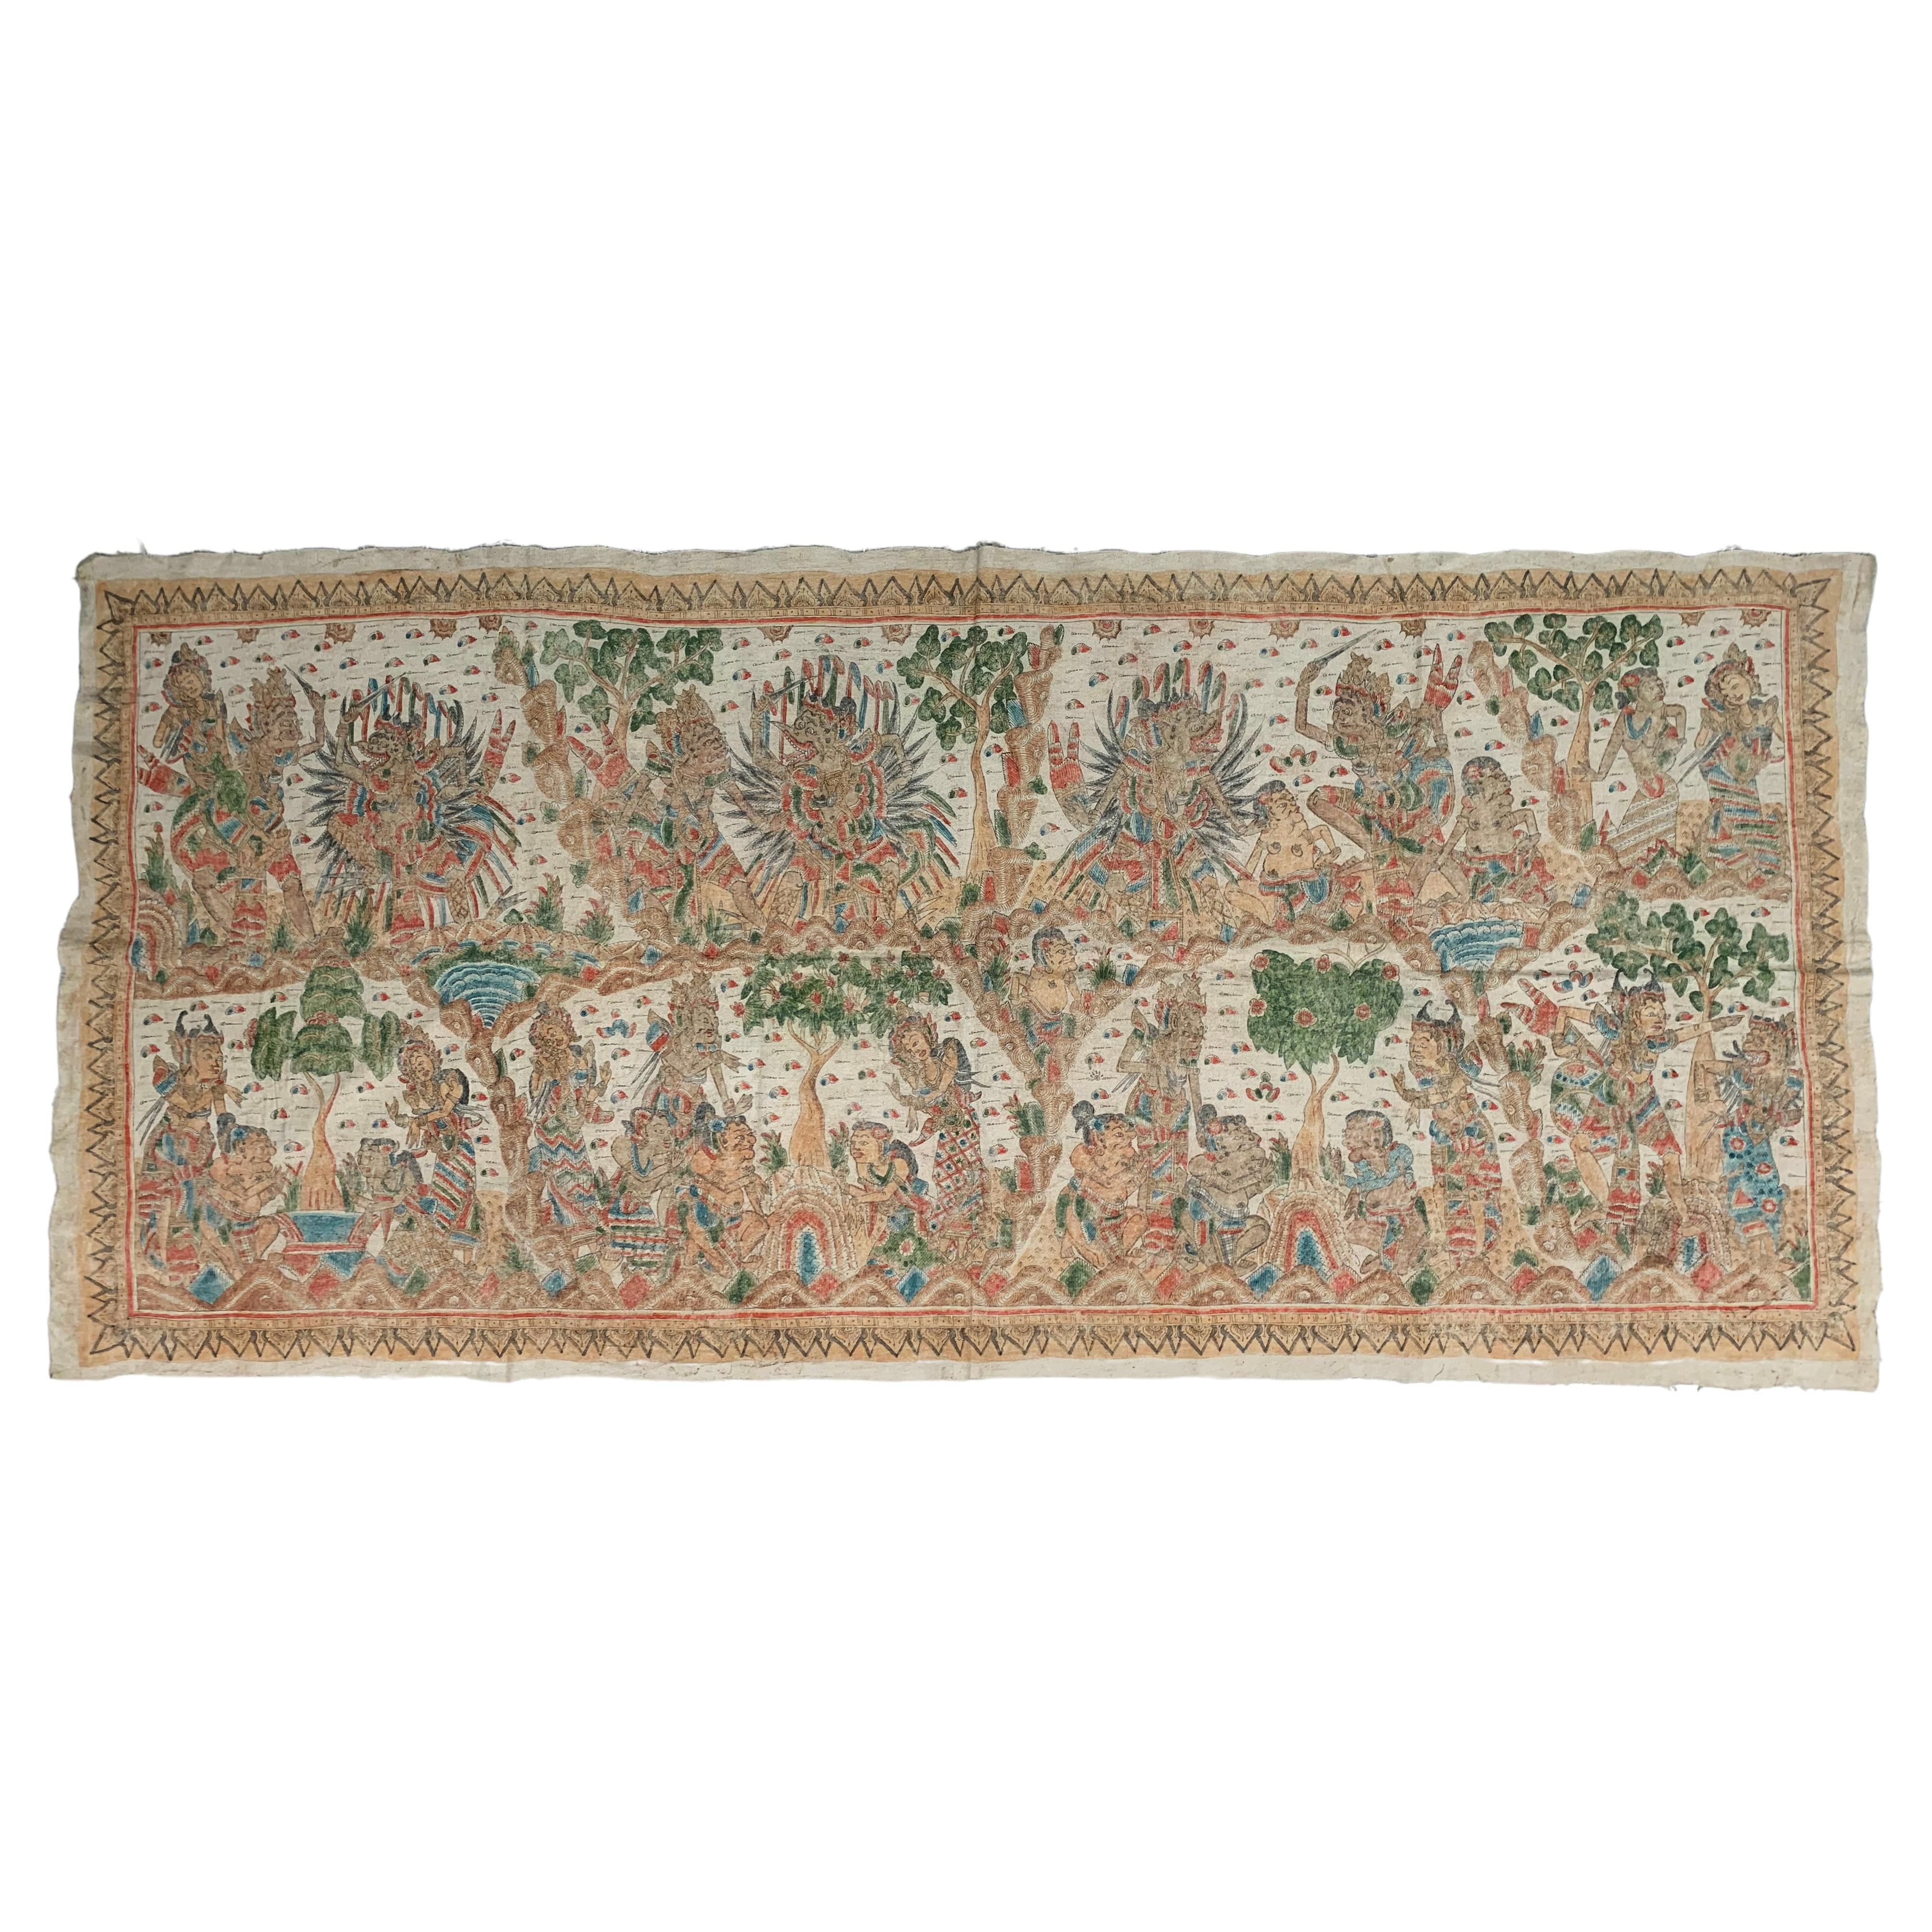 Bali Hindu Textile 'Kamasan' Painting, Indonesia, Early 20th Century For Sale